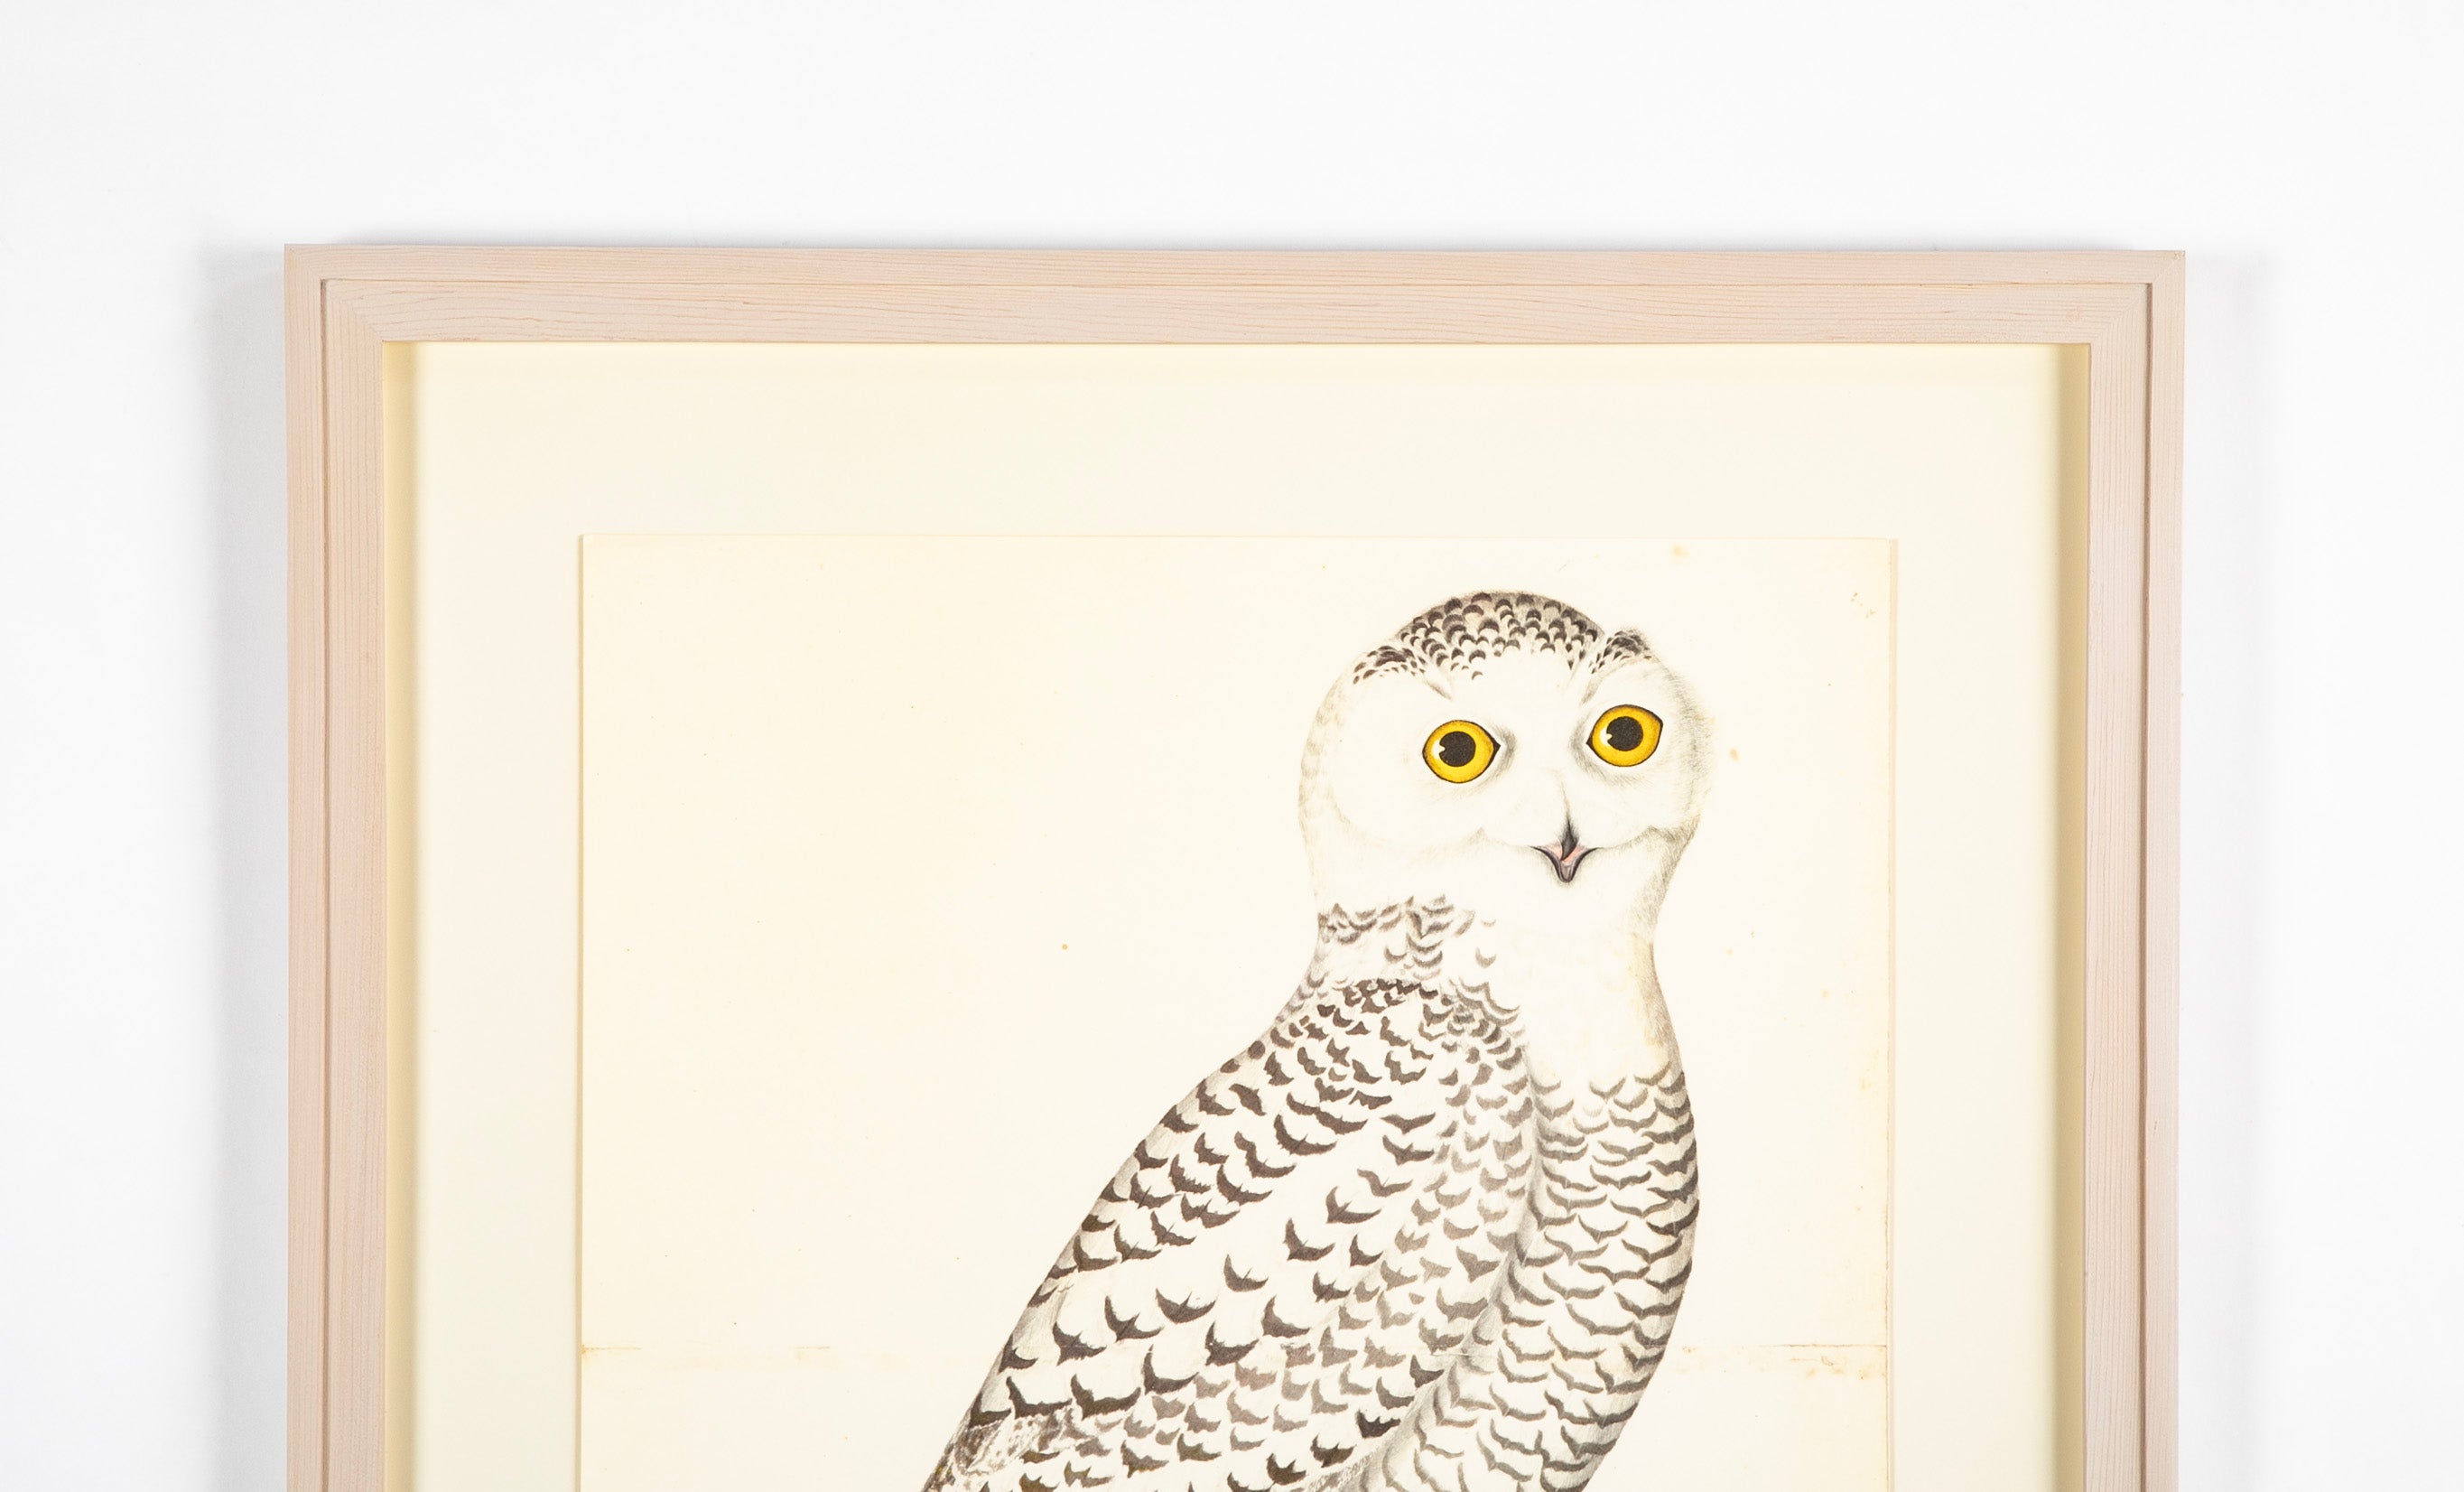 Offset Lithograph of "Snowy Owl, Juvenile Male, PL 30" from the "The Great Bird Book" by Olof Rudbeck The Younger (1660-1740)